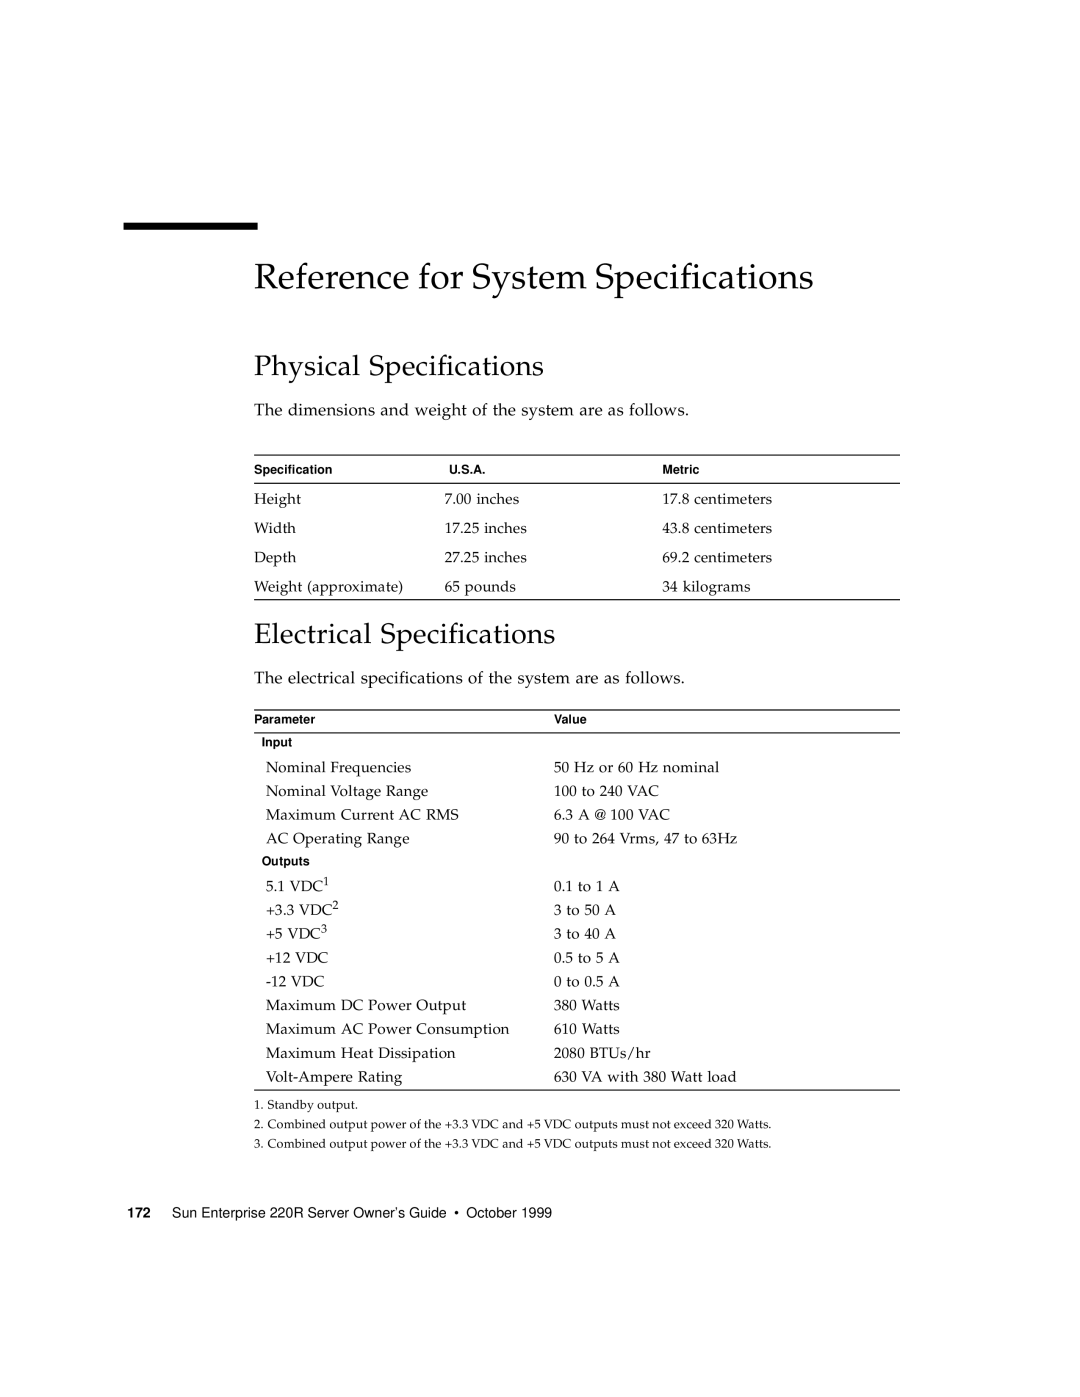 Sun Microsystems 220R manual Reference for System Specifications, Physical Specifications, Electrical Specifications 